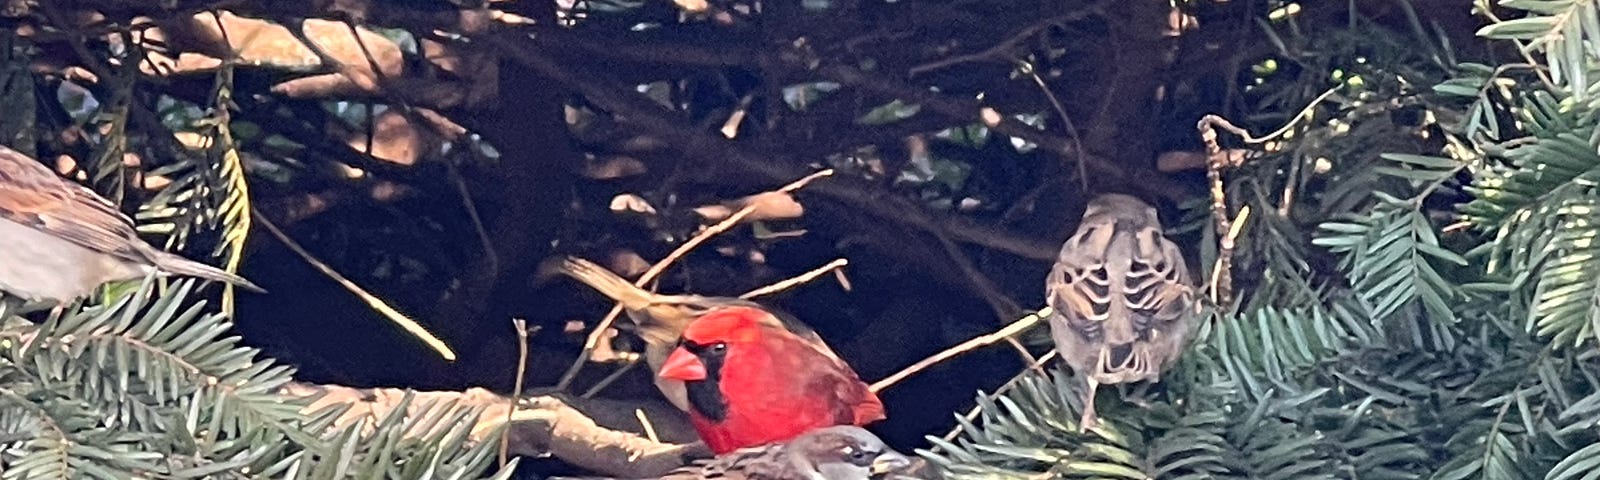 A northern cardinal in Central Park